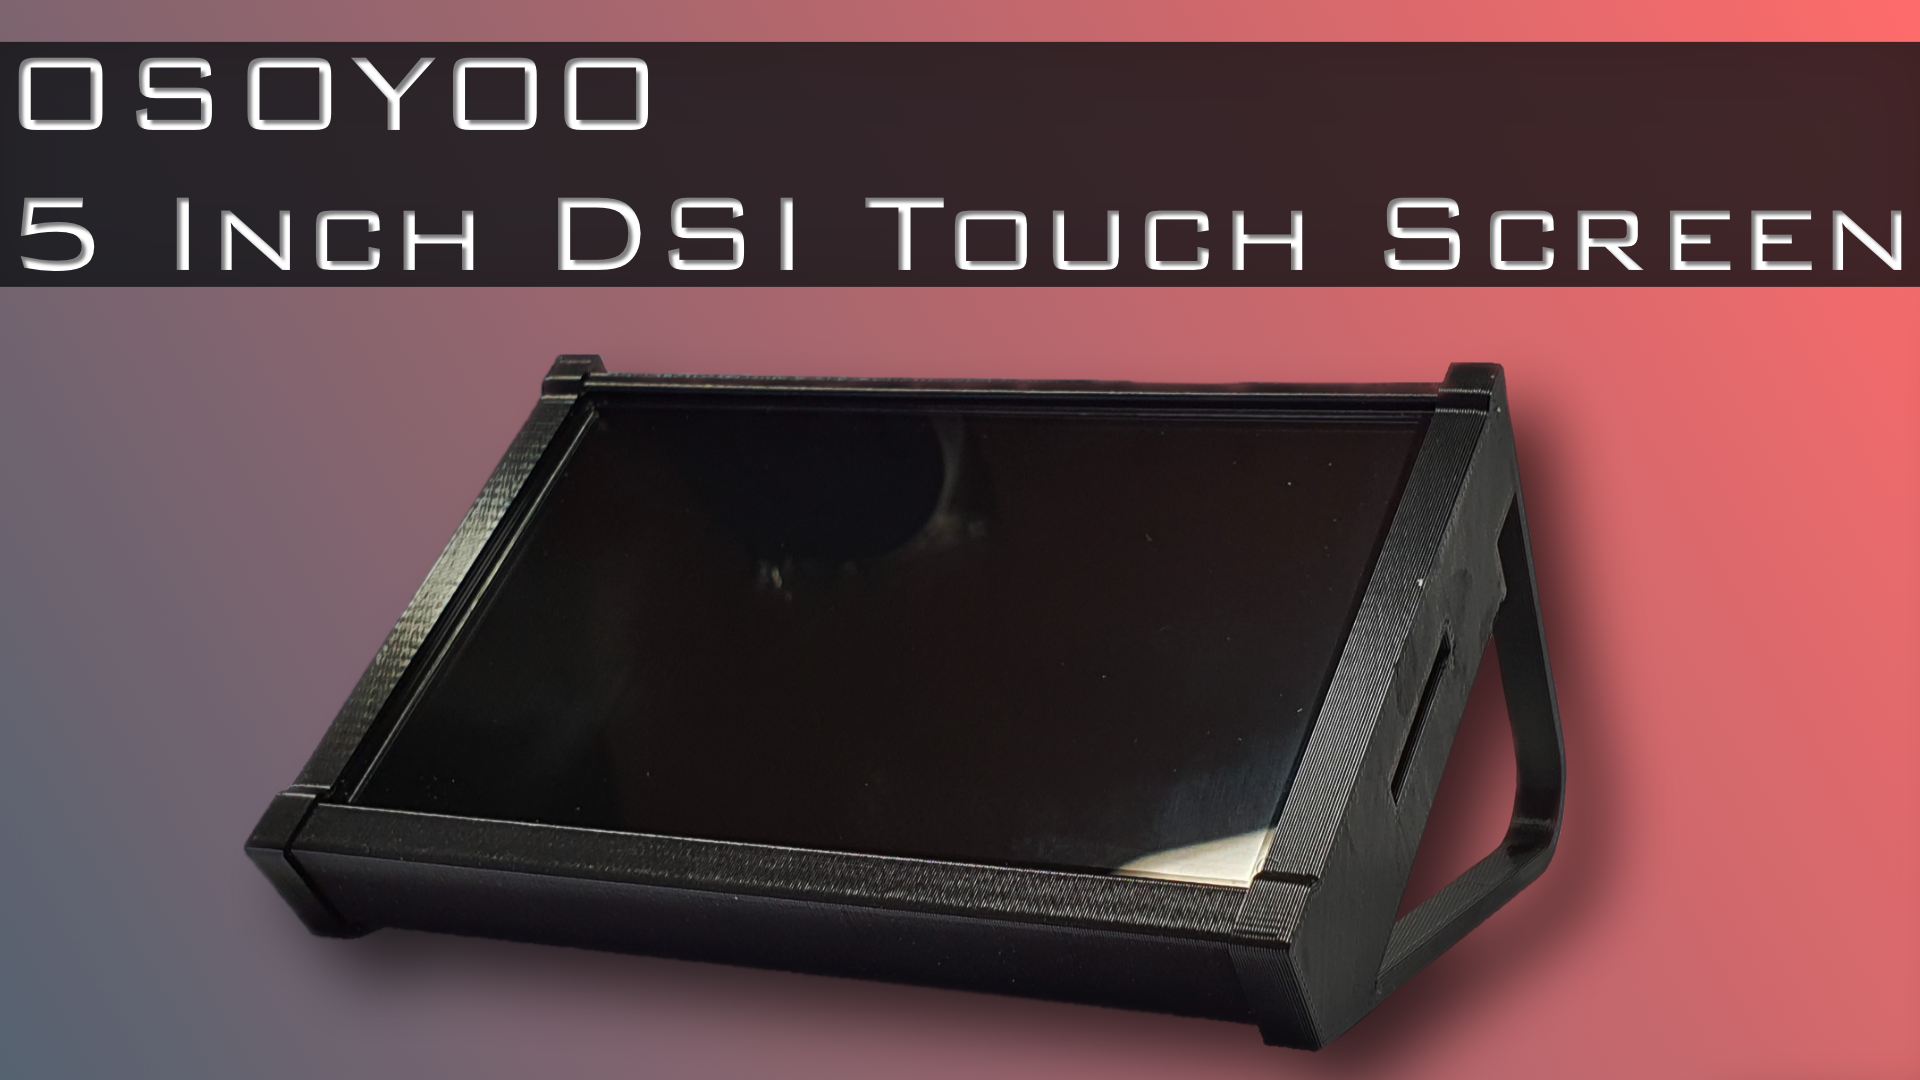 OSOYOO 5 Inch DSI Touch Screen Holder